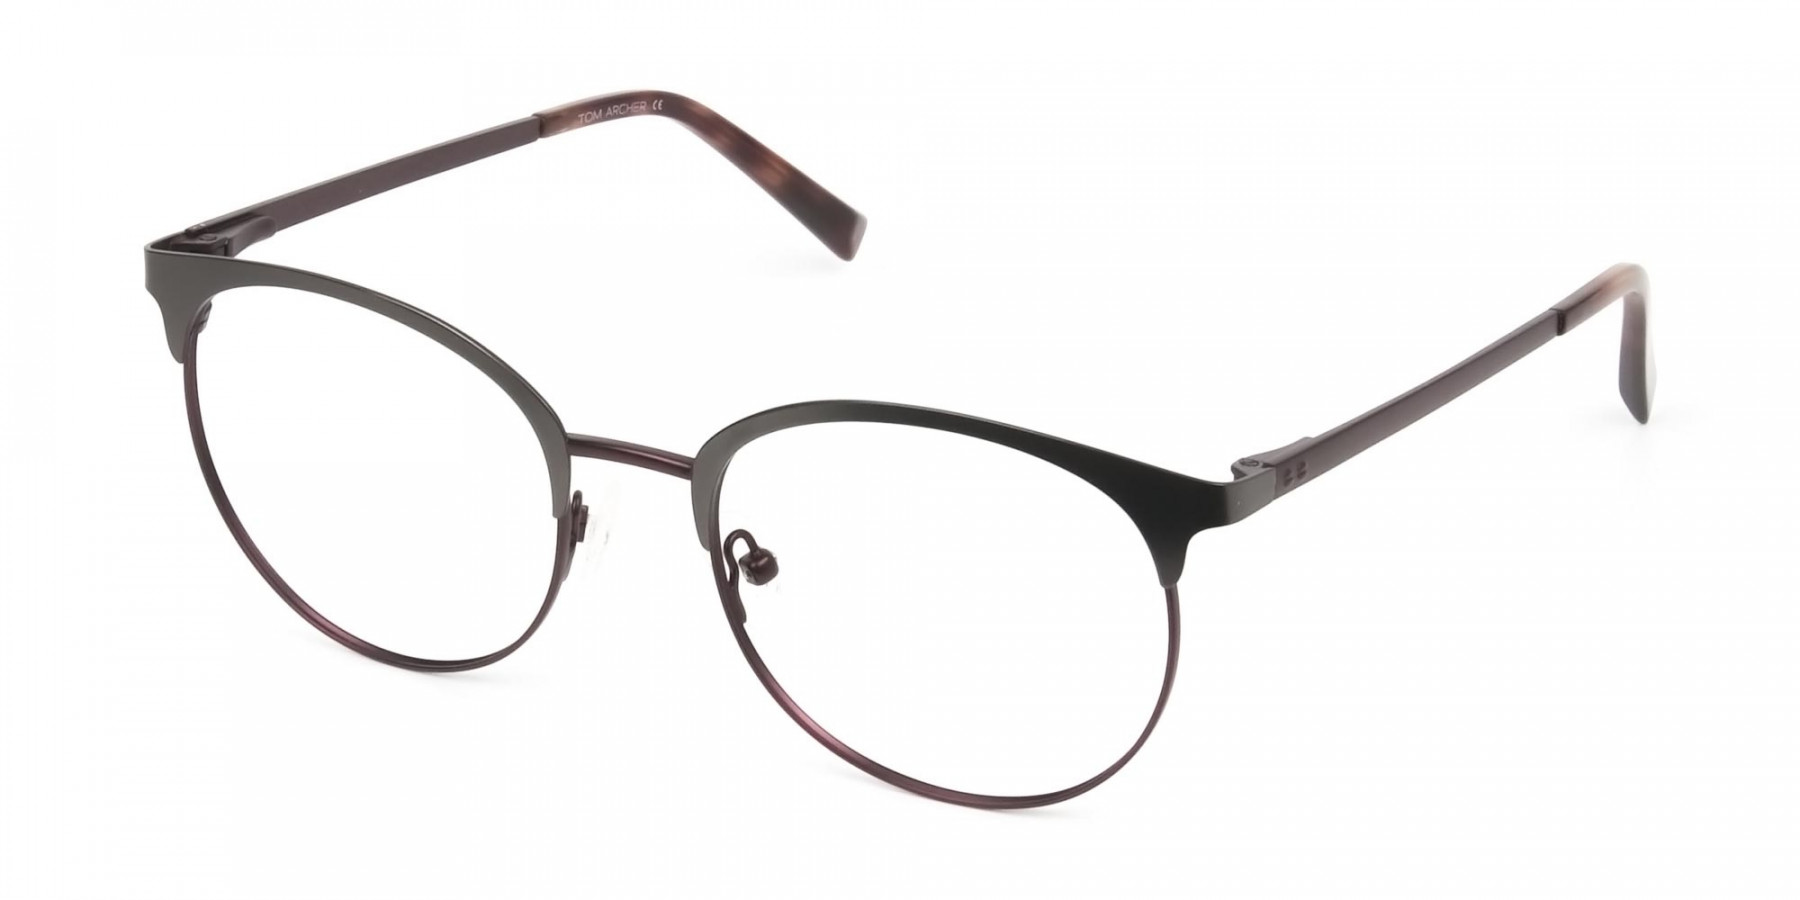 COVEN 4 - Brown & Gunmetal Clubmaster Glasses | Specscart.®